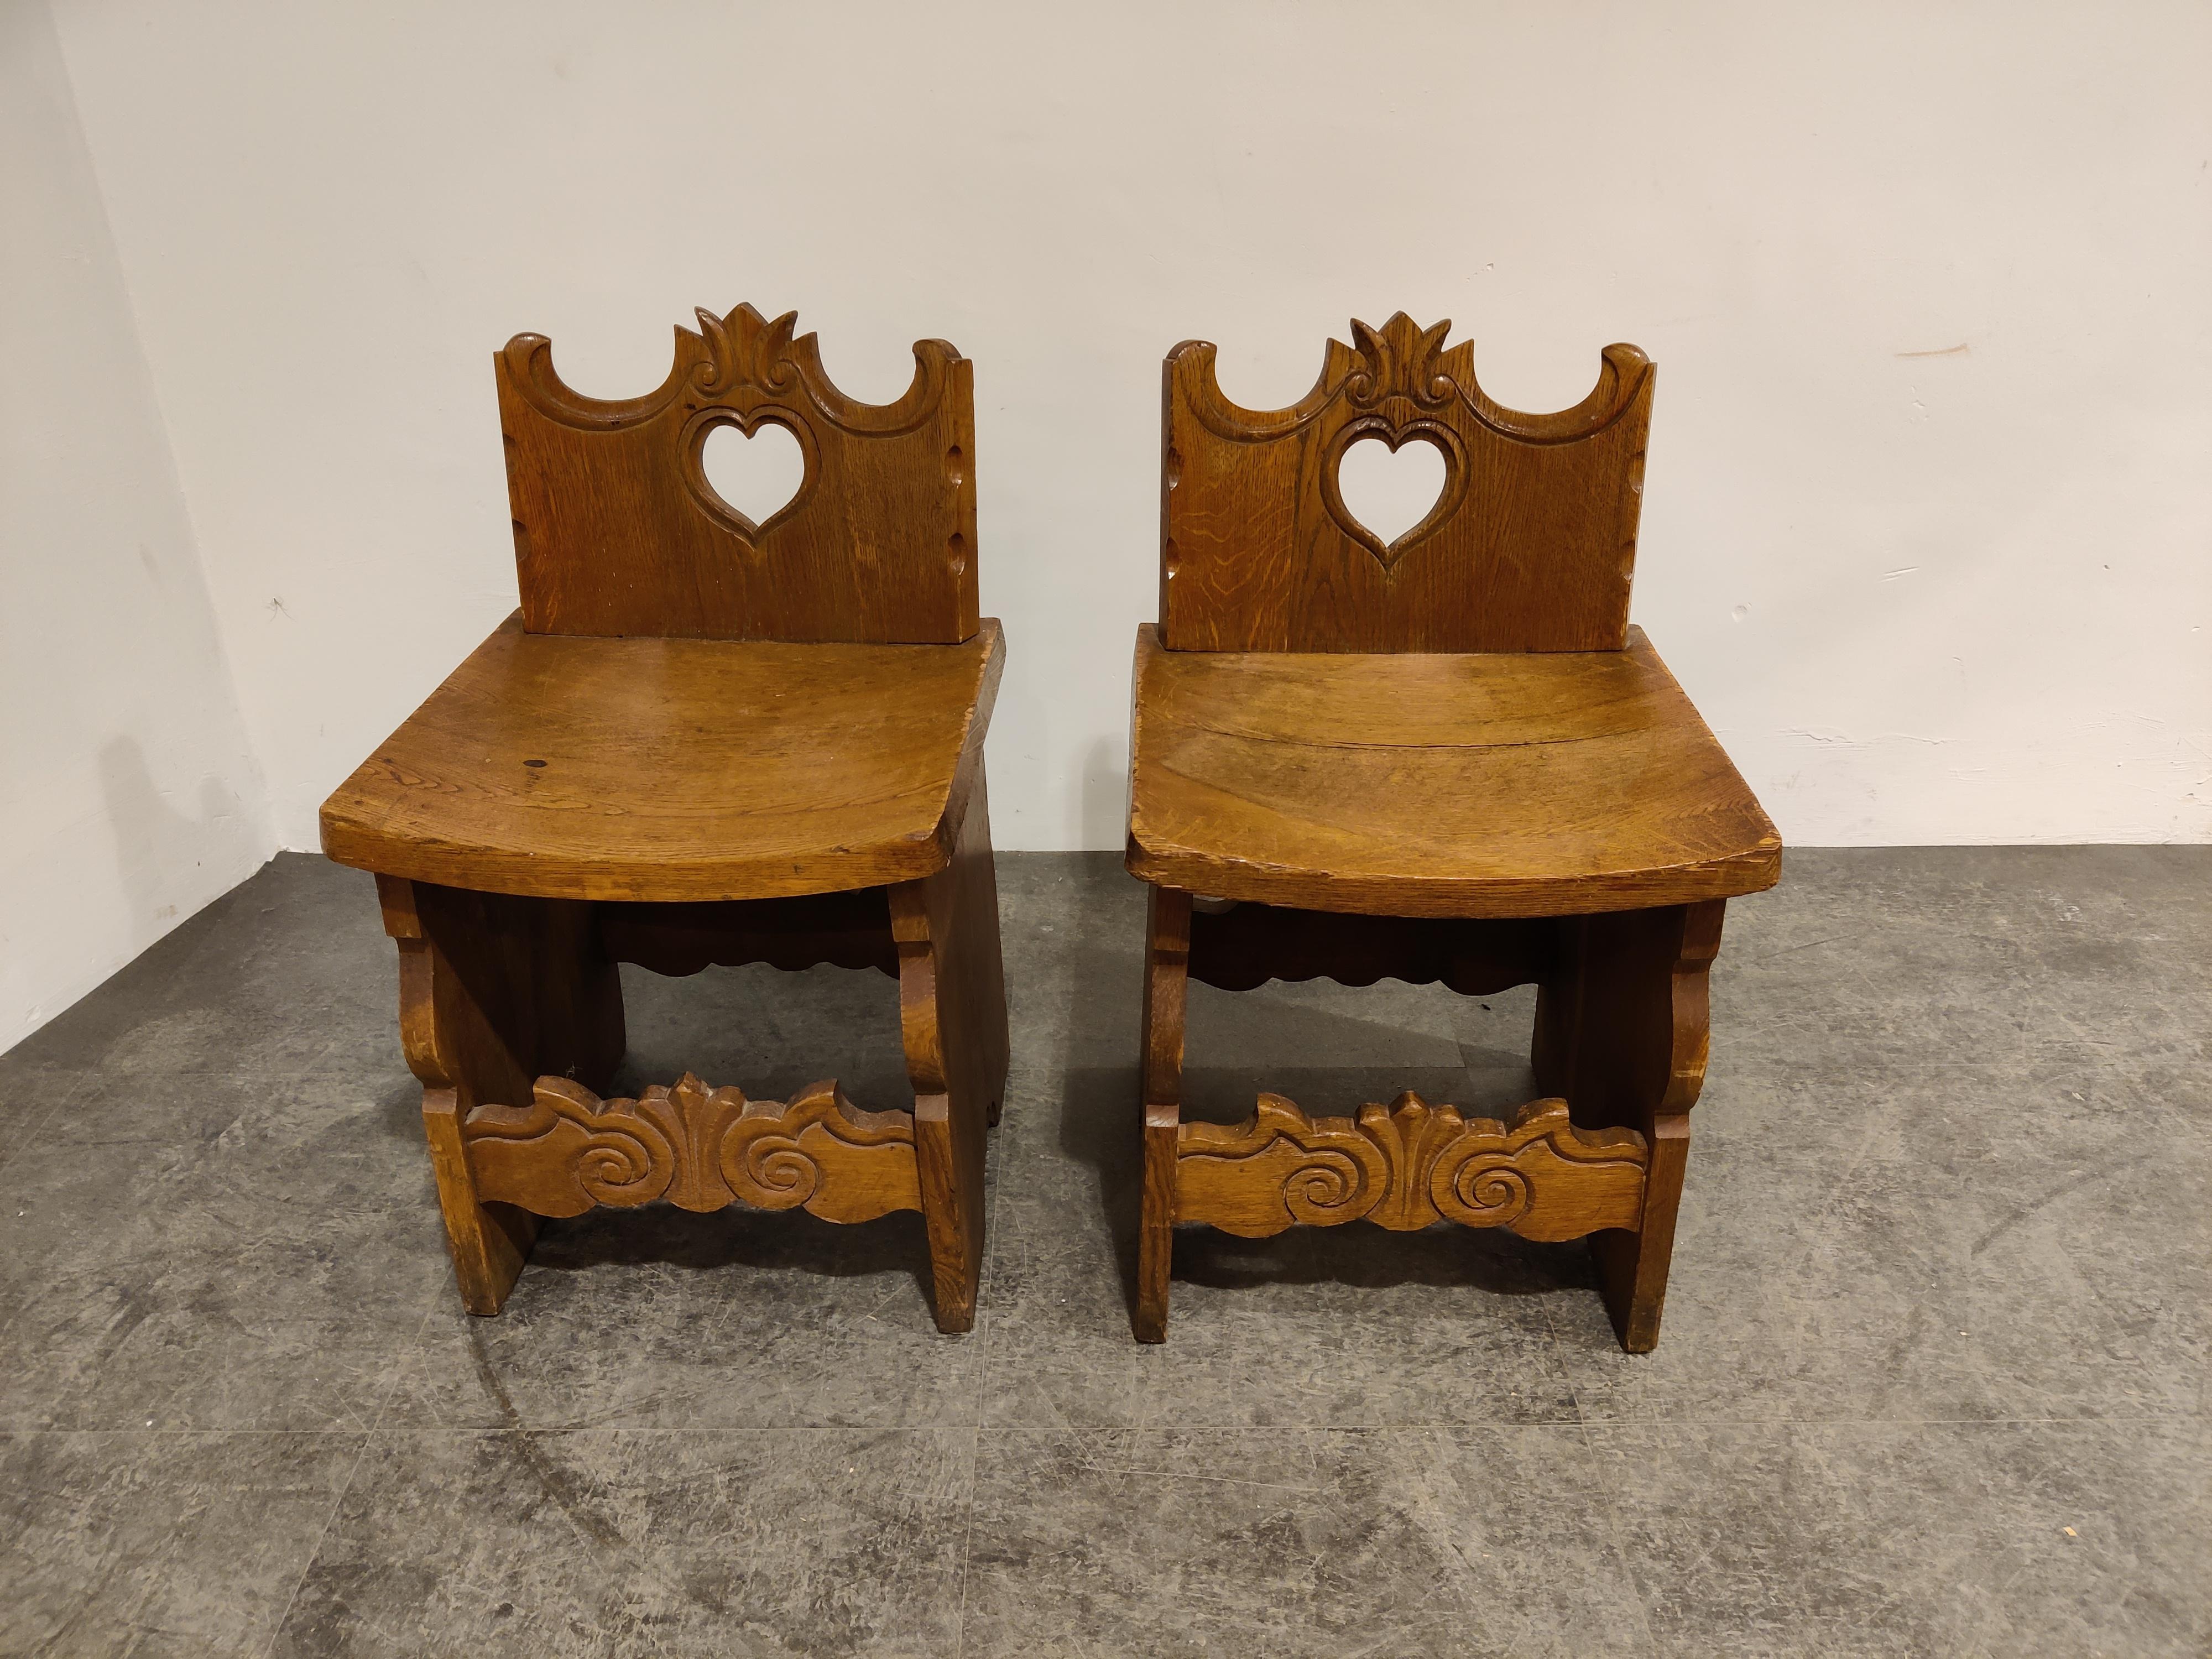 Early 20th century Folk Art carved oak side chairs with heart cutout. 

Very sturdy and heavy chairs. 

Believed to be italian work

1900s, Italy

Good condition

Great decorative look.

Dimensions:
Height 72cm/28.34